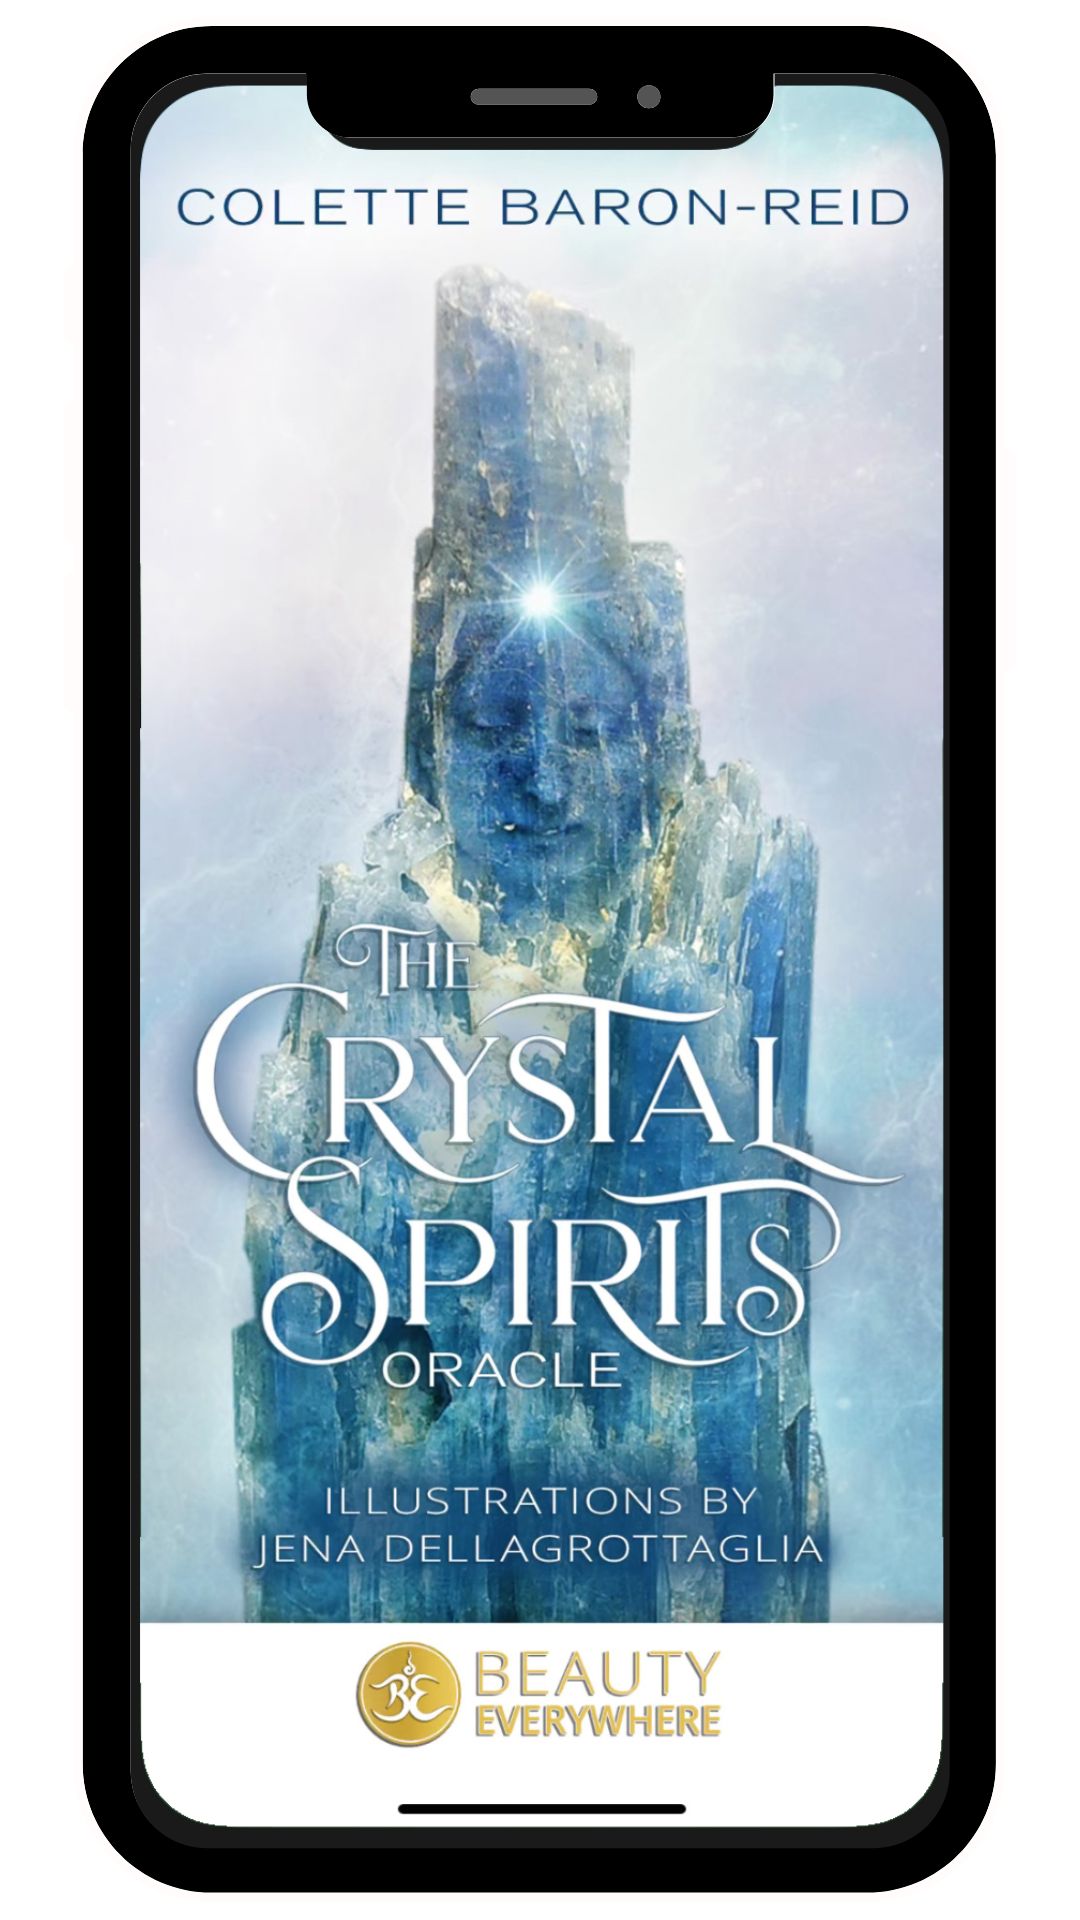 Crystal Spirits Oracle Cards by Colette Baron-Reid